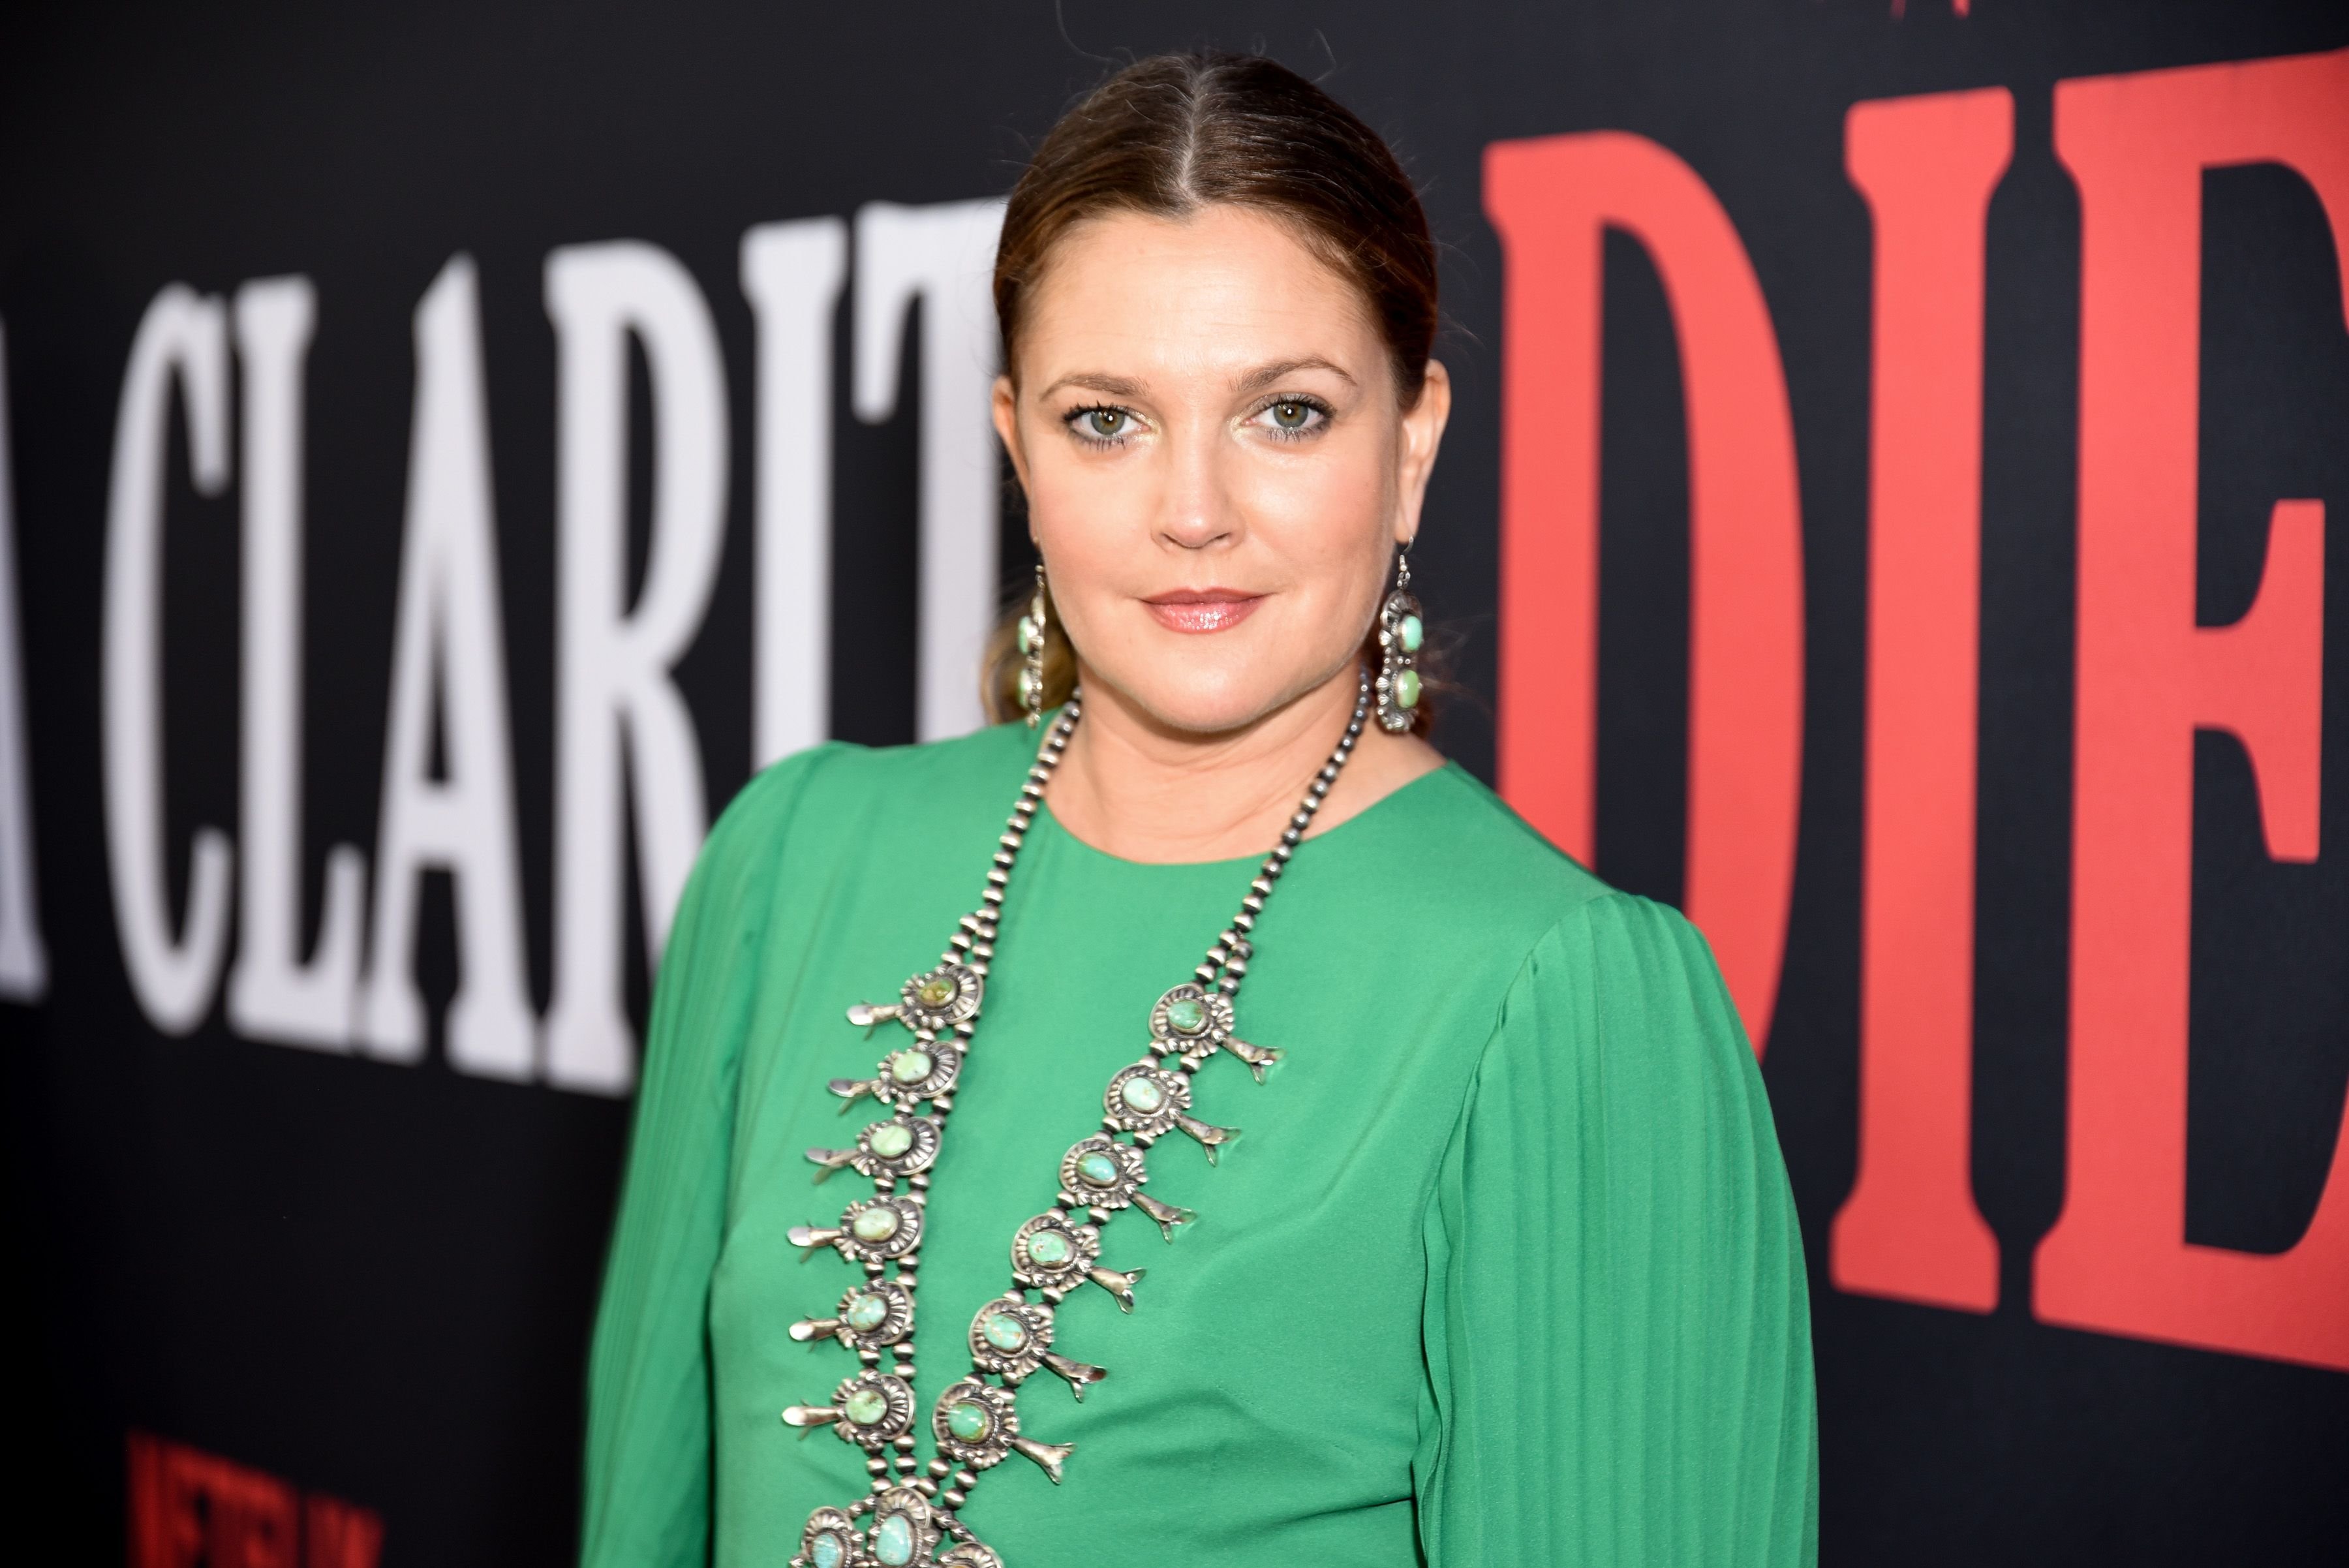 Drew Barrymore at Netflix's "Santa Clarita Diet" Season 3 Premiere at Hollywood Post 43 on March 28, 2019 | Photo: Getty Images